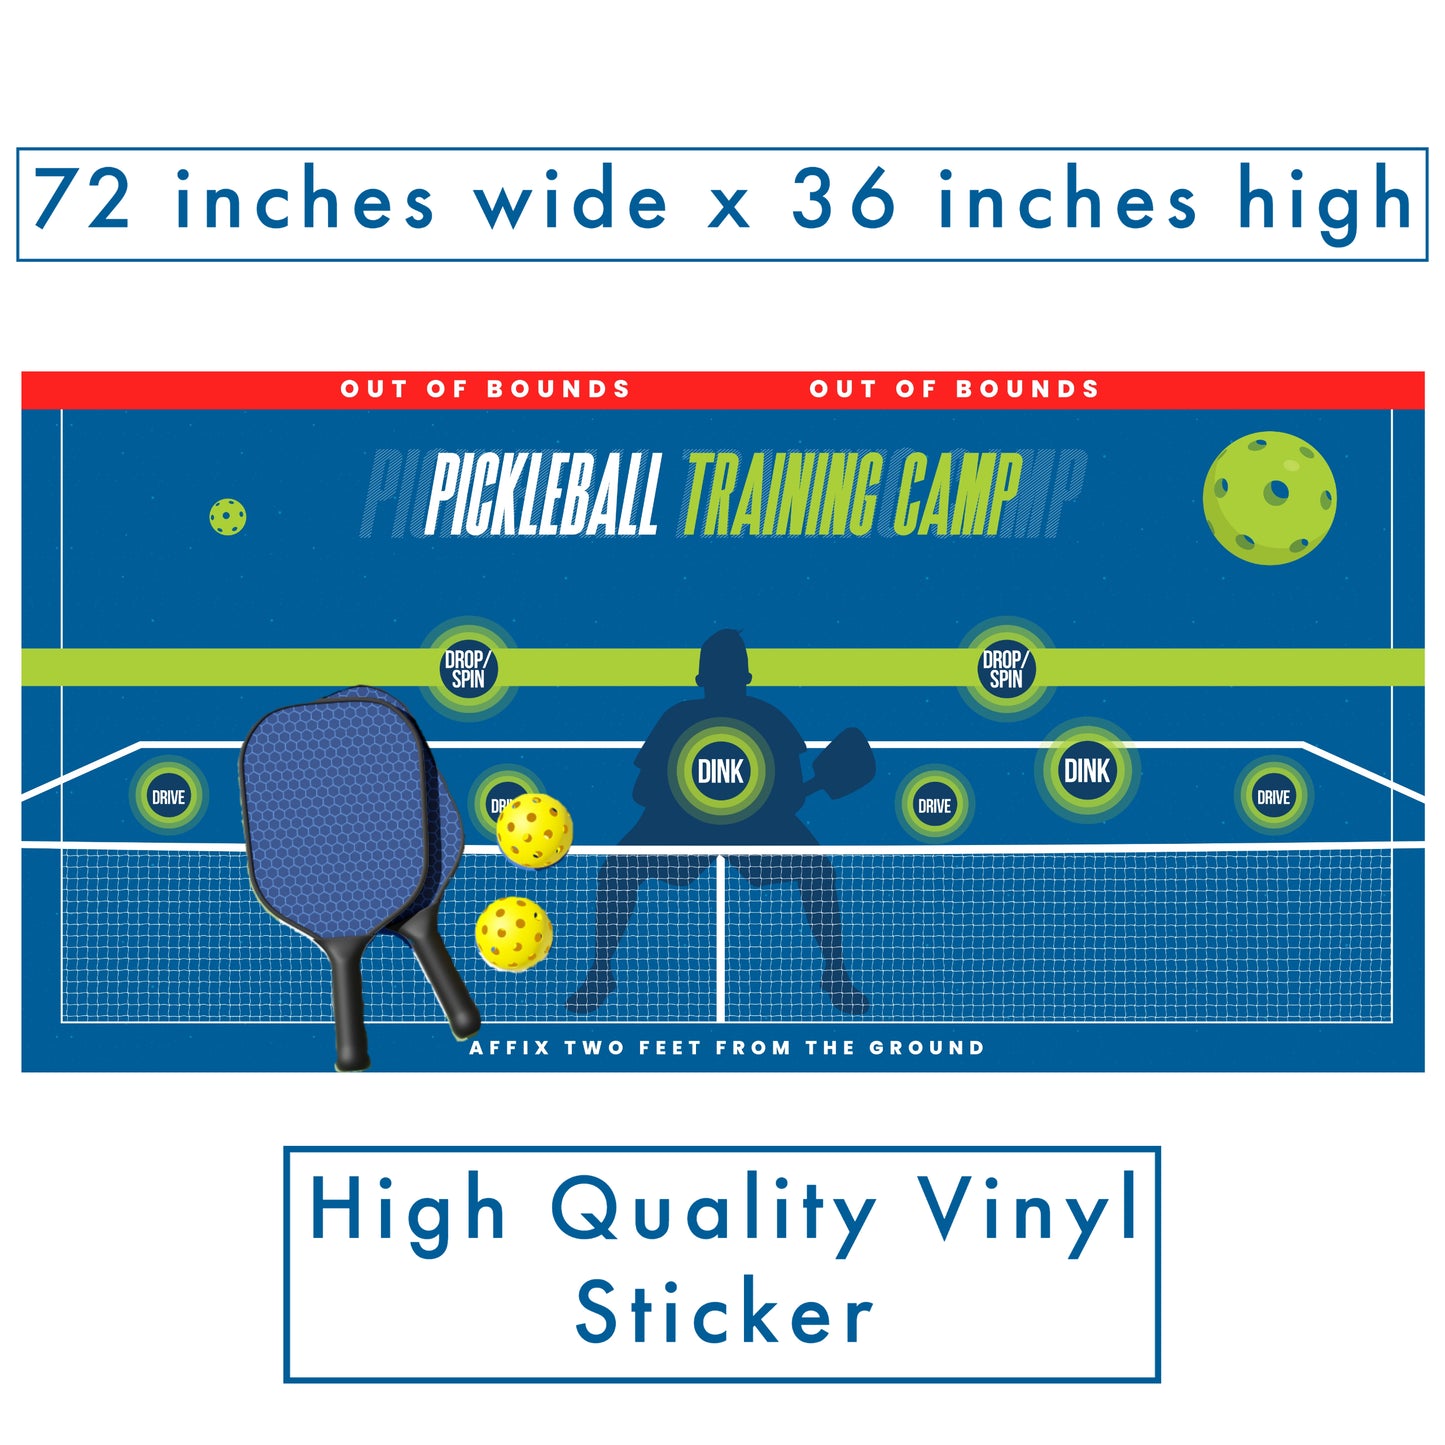 Ultimate Pickleball Rebounder Training Aid 48x36 inches | Improve Your Dinks and Elevate Your Game | Convert Any Wall into a Pickleball Court